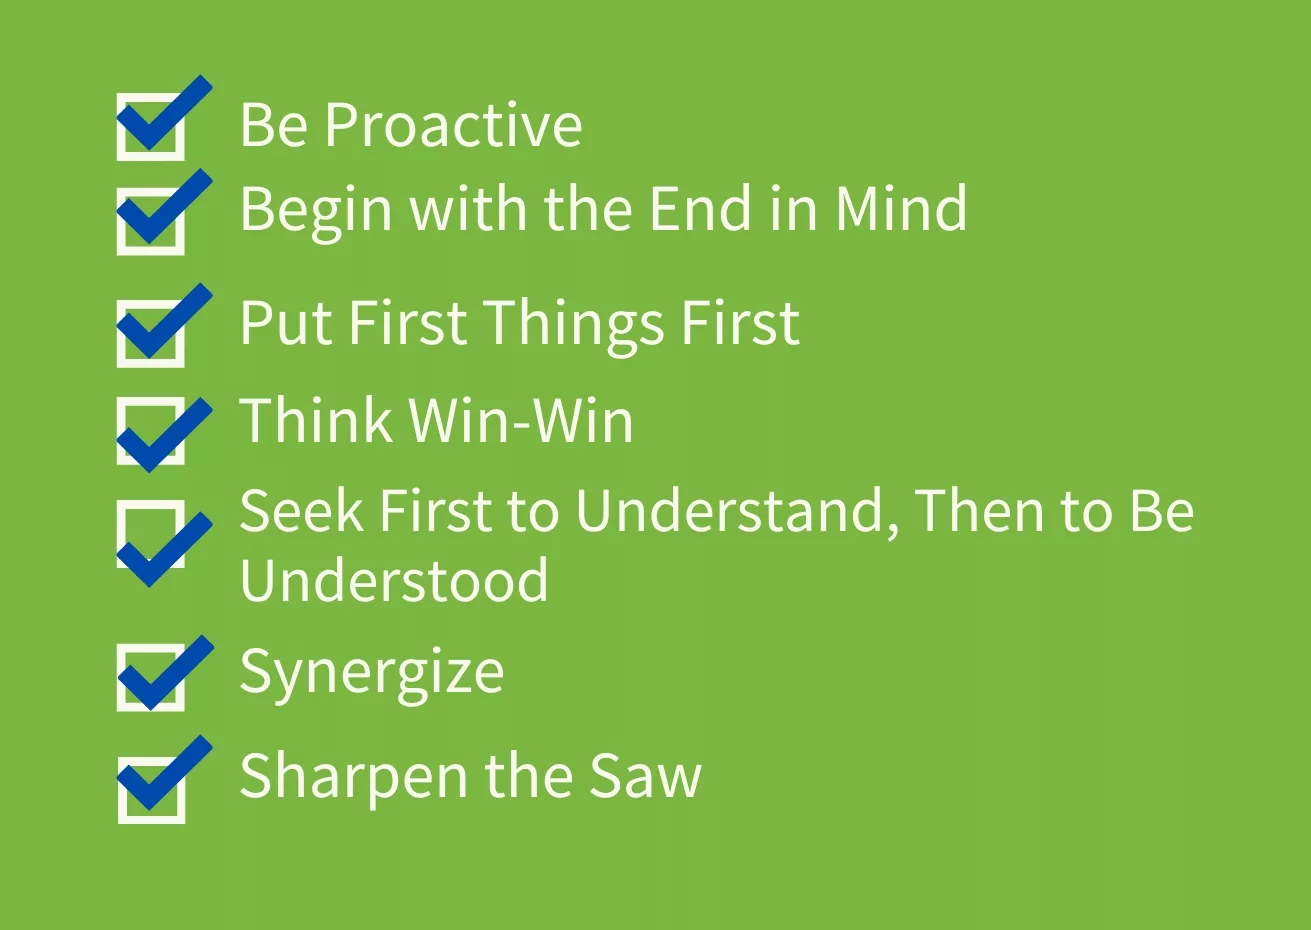 7 habits listed by Covey